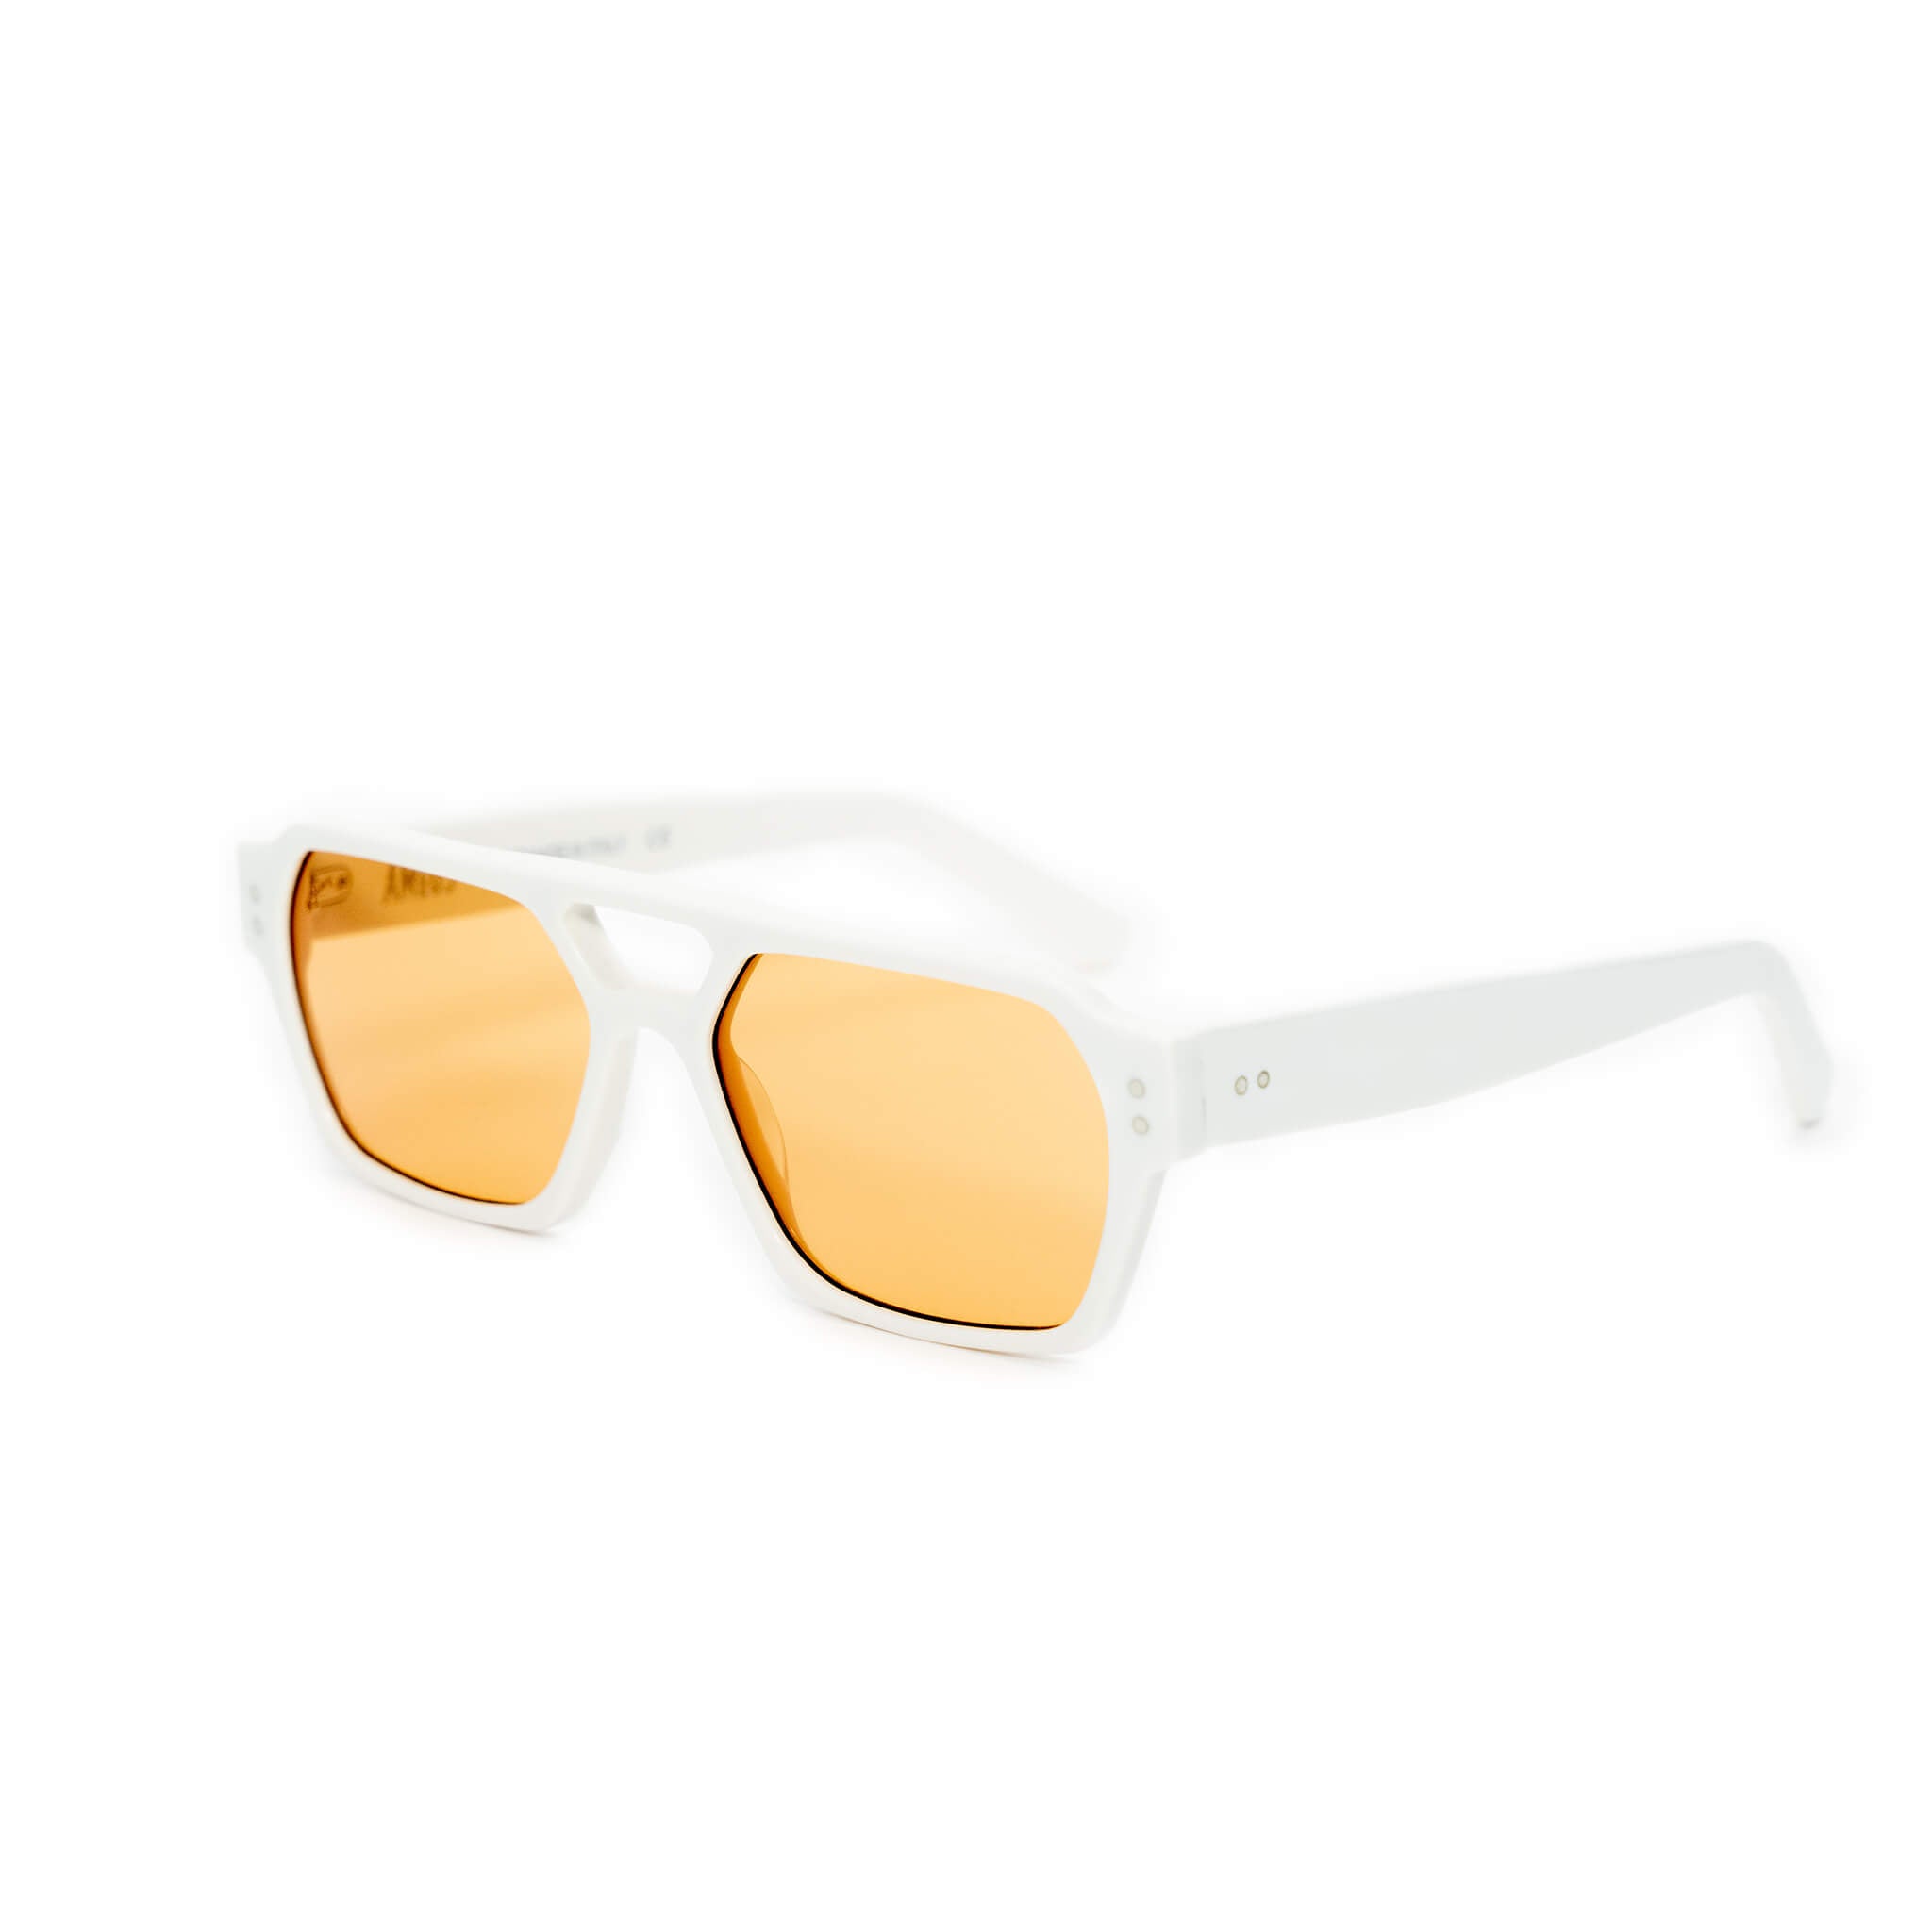 Ego sunglasses in white and orange from Ameos side angle